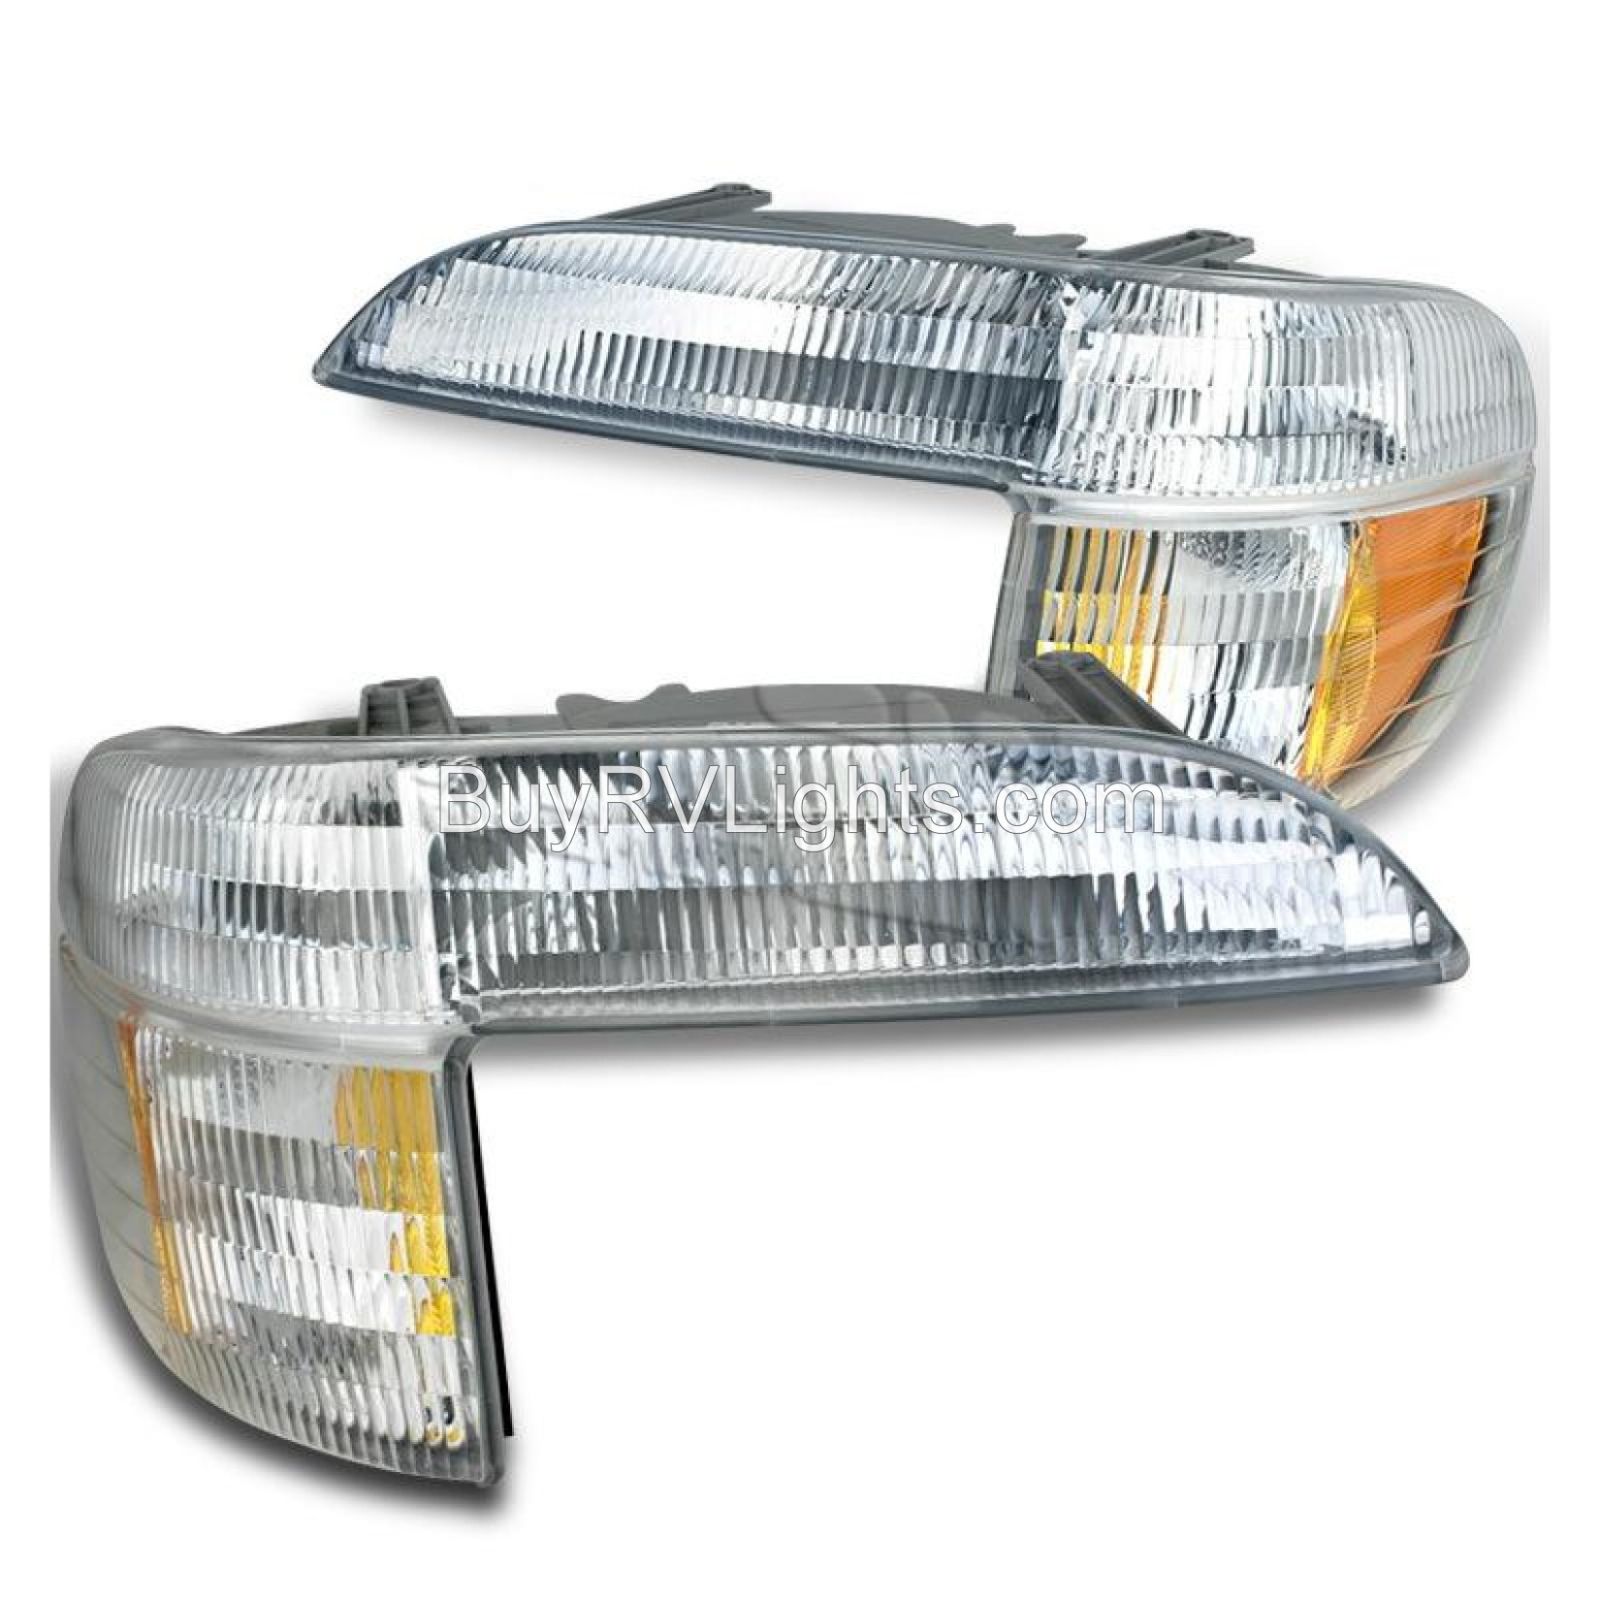 Country Coach Intrigue Ovation Corner Turn Signal Lamps Unit Pair (Left & Right)